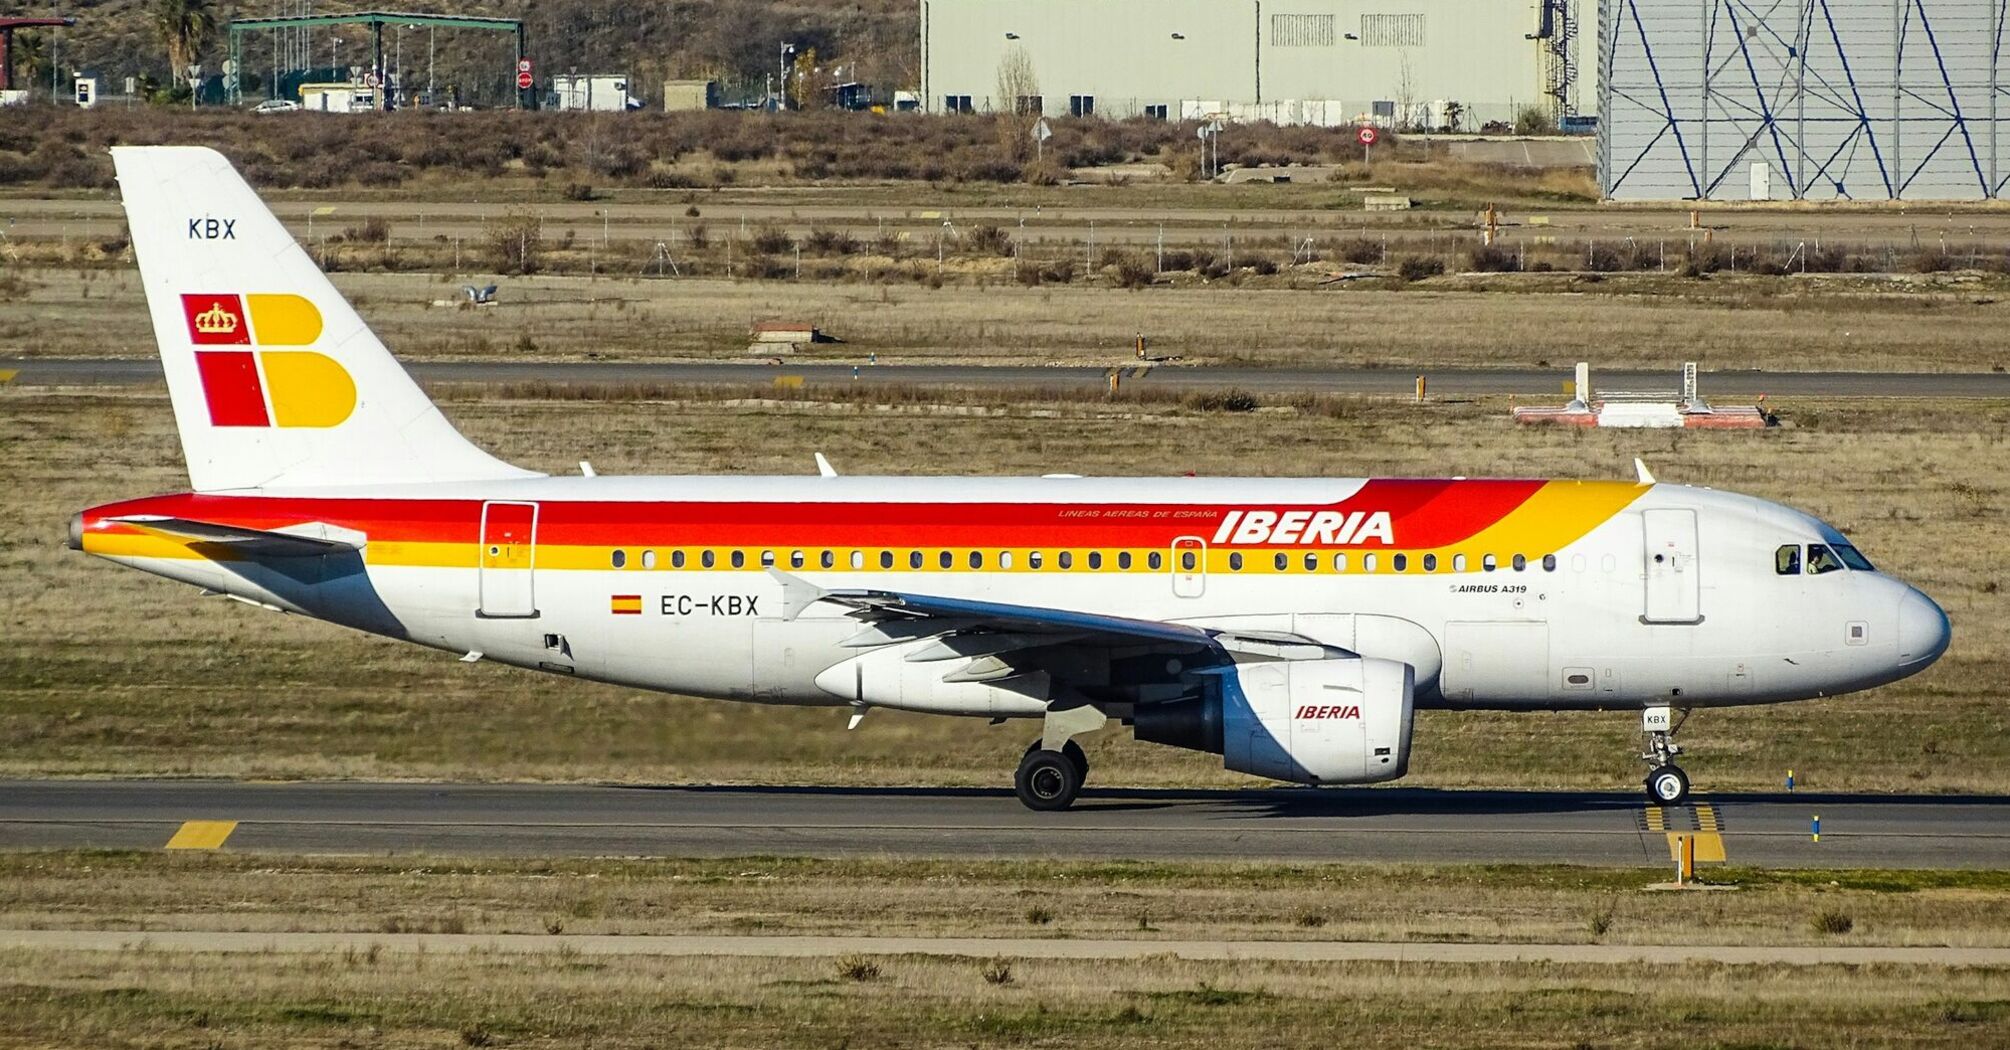 Iberia aircraft on the runway